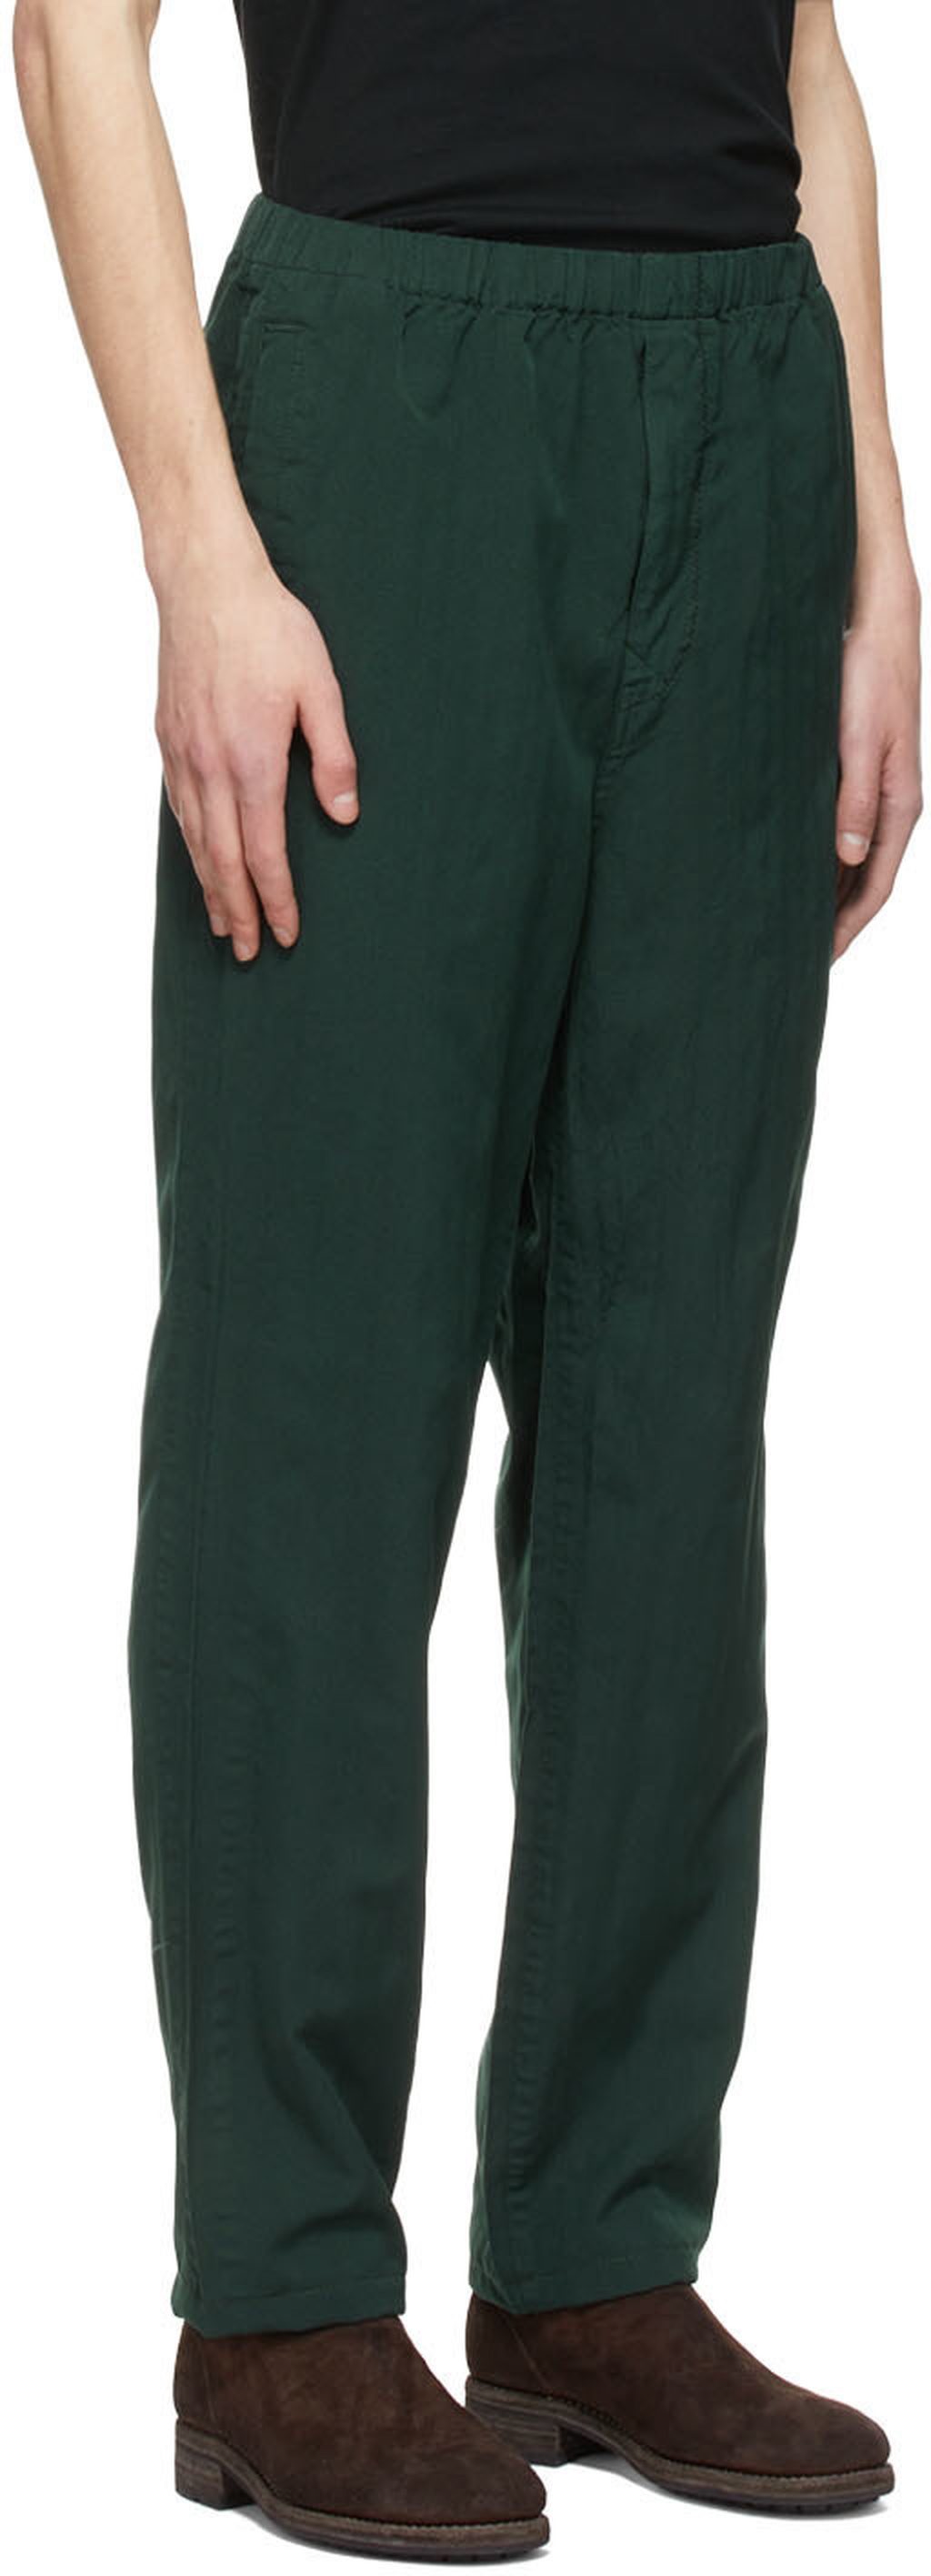 Undercover Green Polyester Trousers Undercover